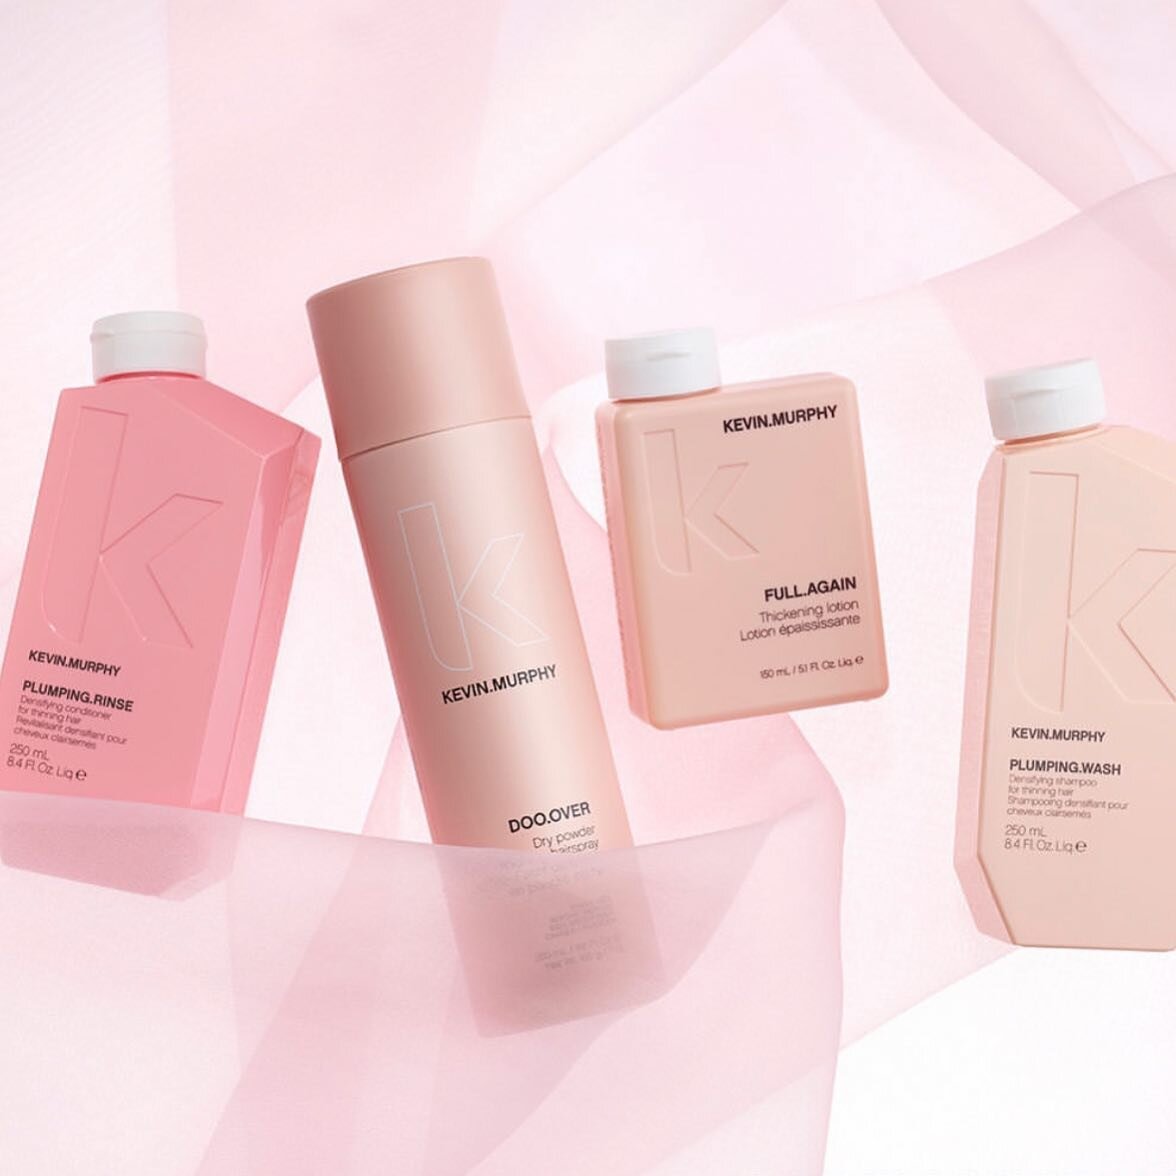 Plumping It Up #kevinmurphy #kevinmurphyproducts #kevinmurphysalon #kevinmurphyhair #hair #salon #scottsdalesalon #salonlife #salonstyle #hairstyles #womensupportingwomen